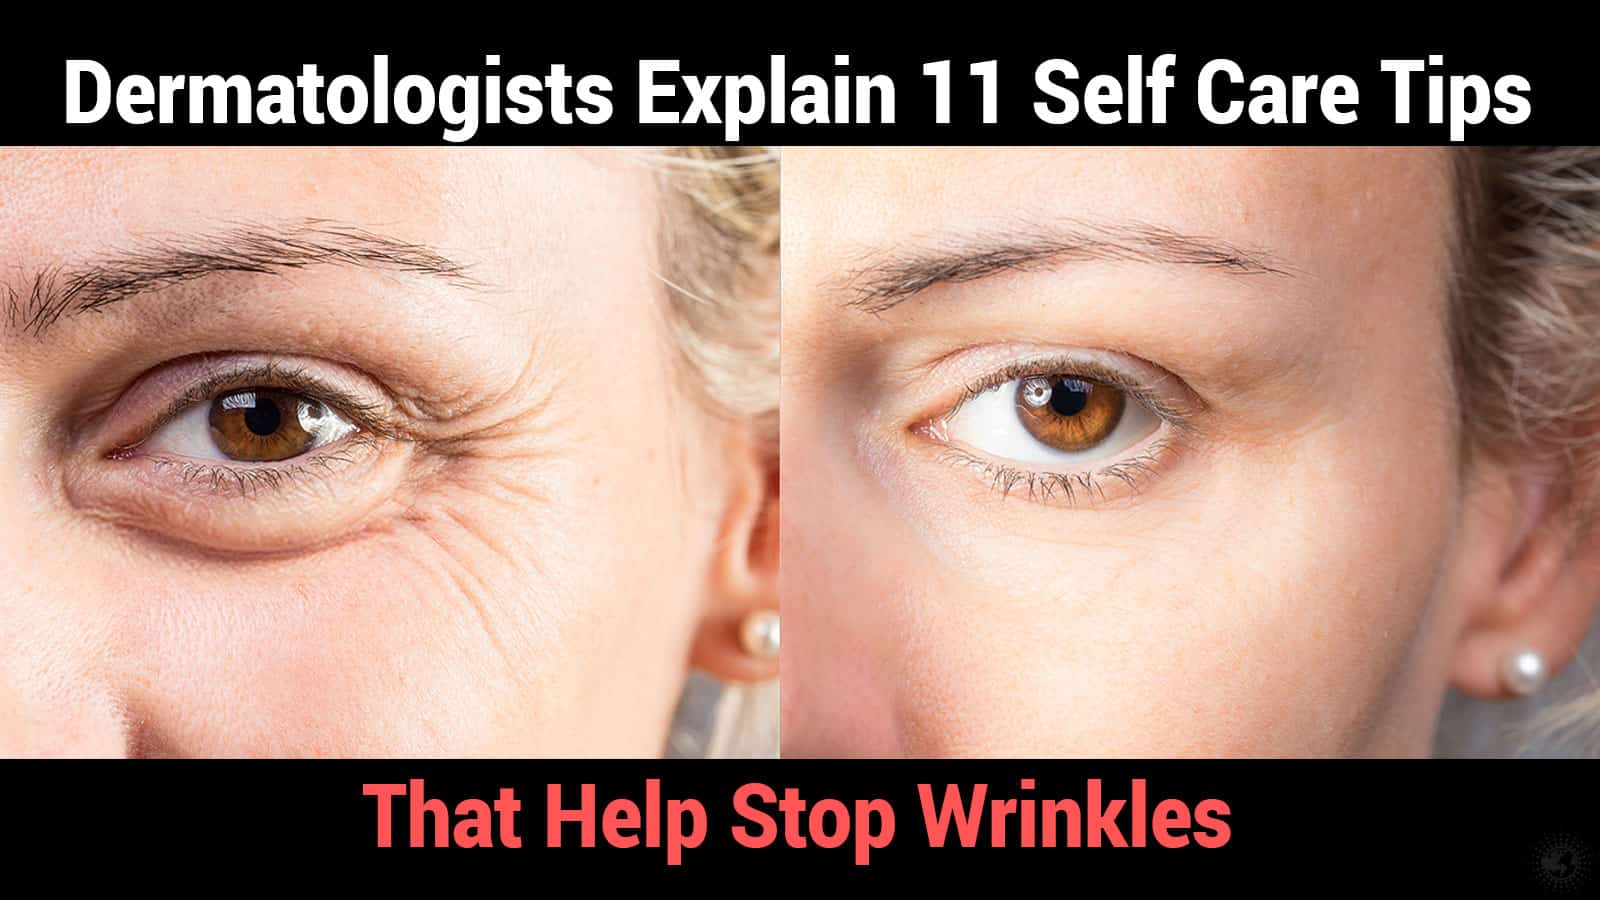 Dermatologists Explain 11 Self Care Tips That Help Stop Wrinkles